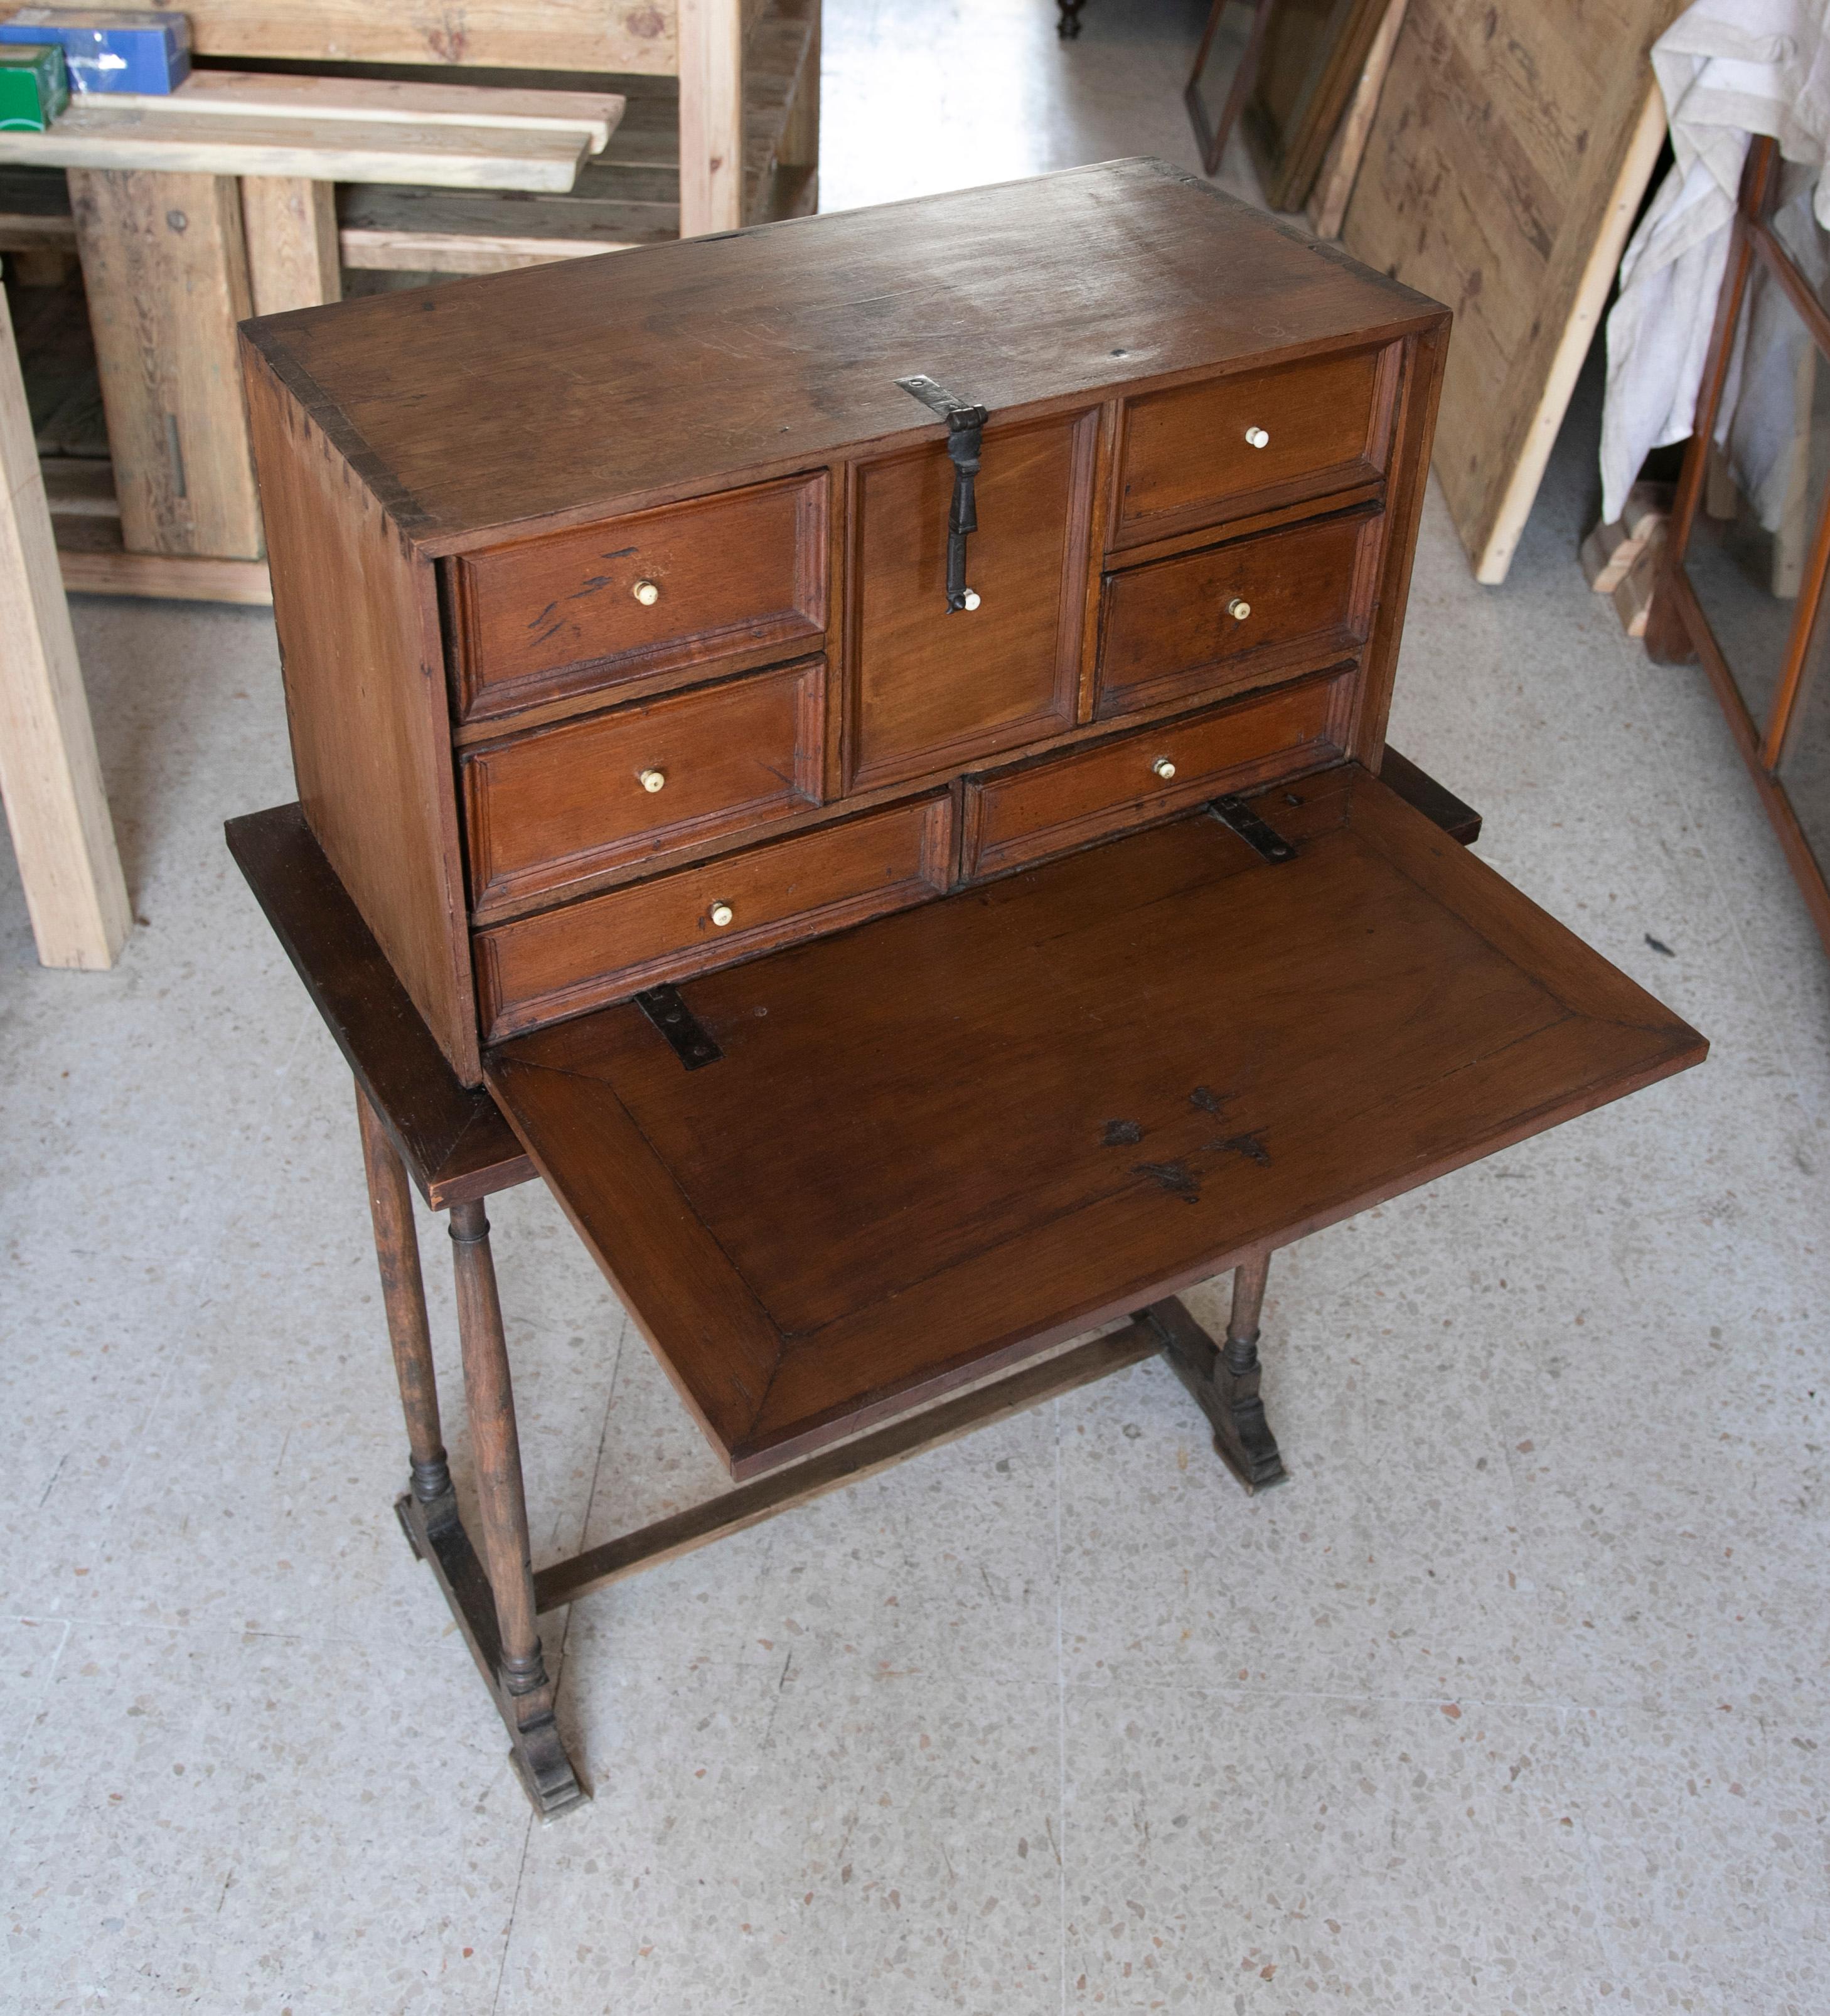 19th Century Spanish Wooden Cabinet with Original Foot, Door and Drawers For Sale 4